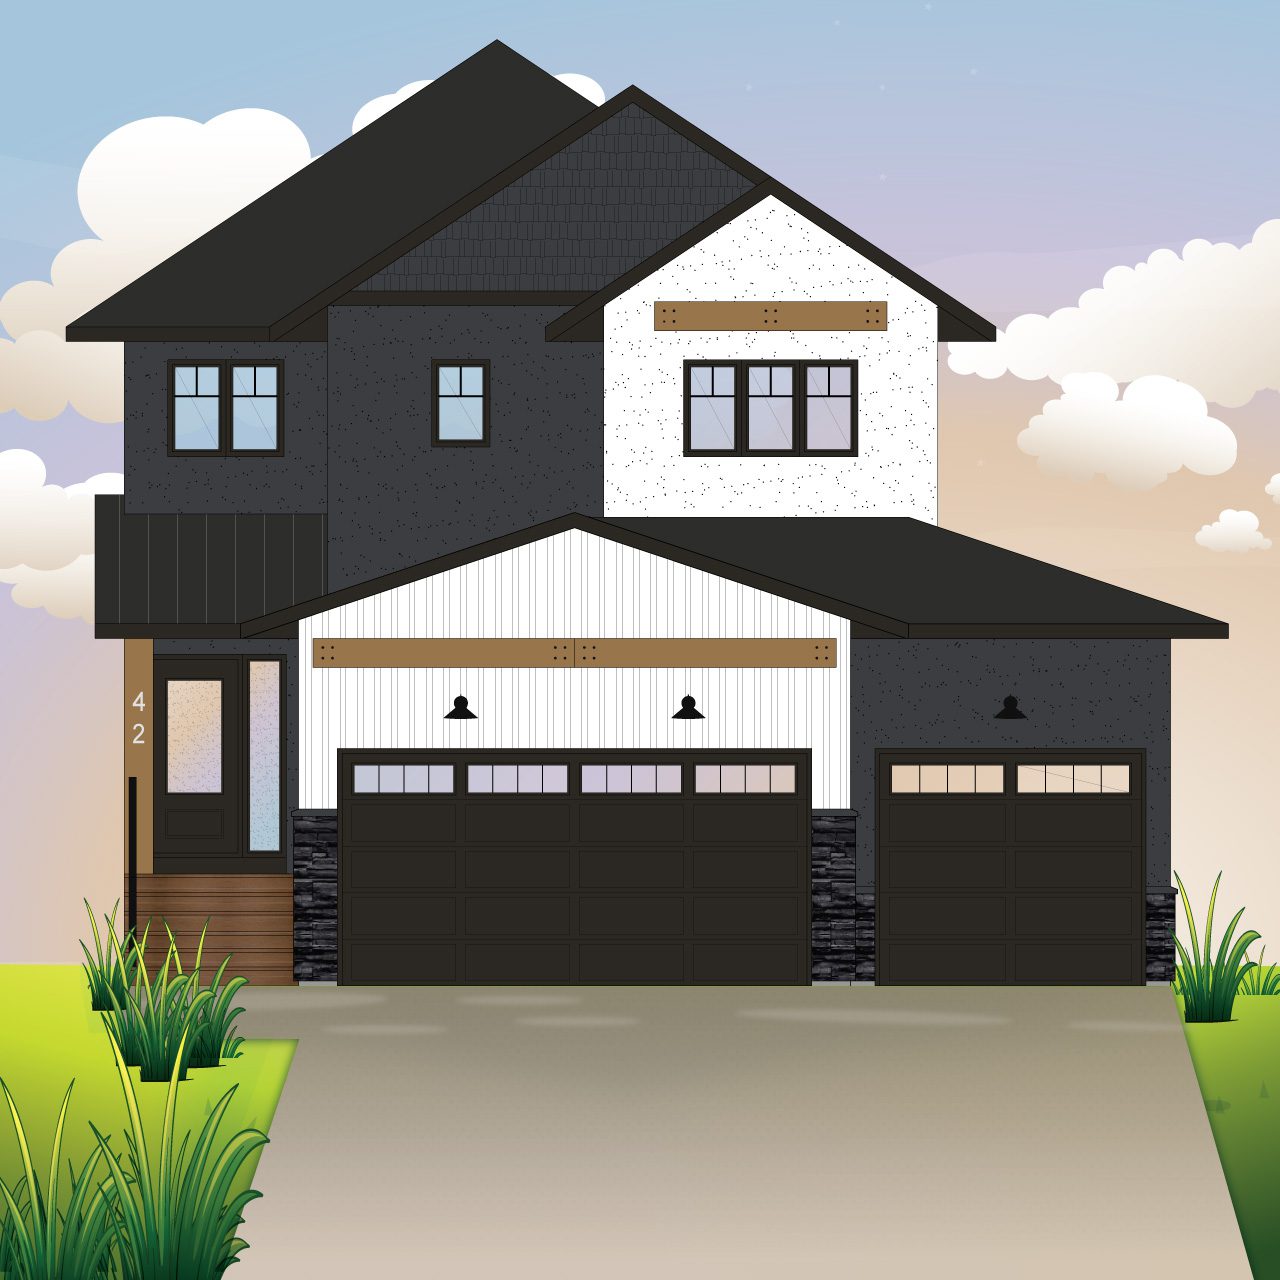 A drawing of a modern farmhouse elevation of a two storey house with triple car garage, black stacked stone, dark grey and white stucco, white siding with natural wooden beam above double garage door, black trim and windows.